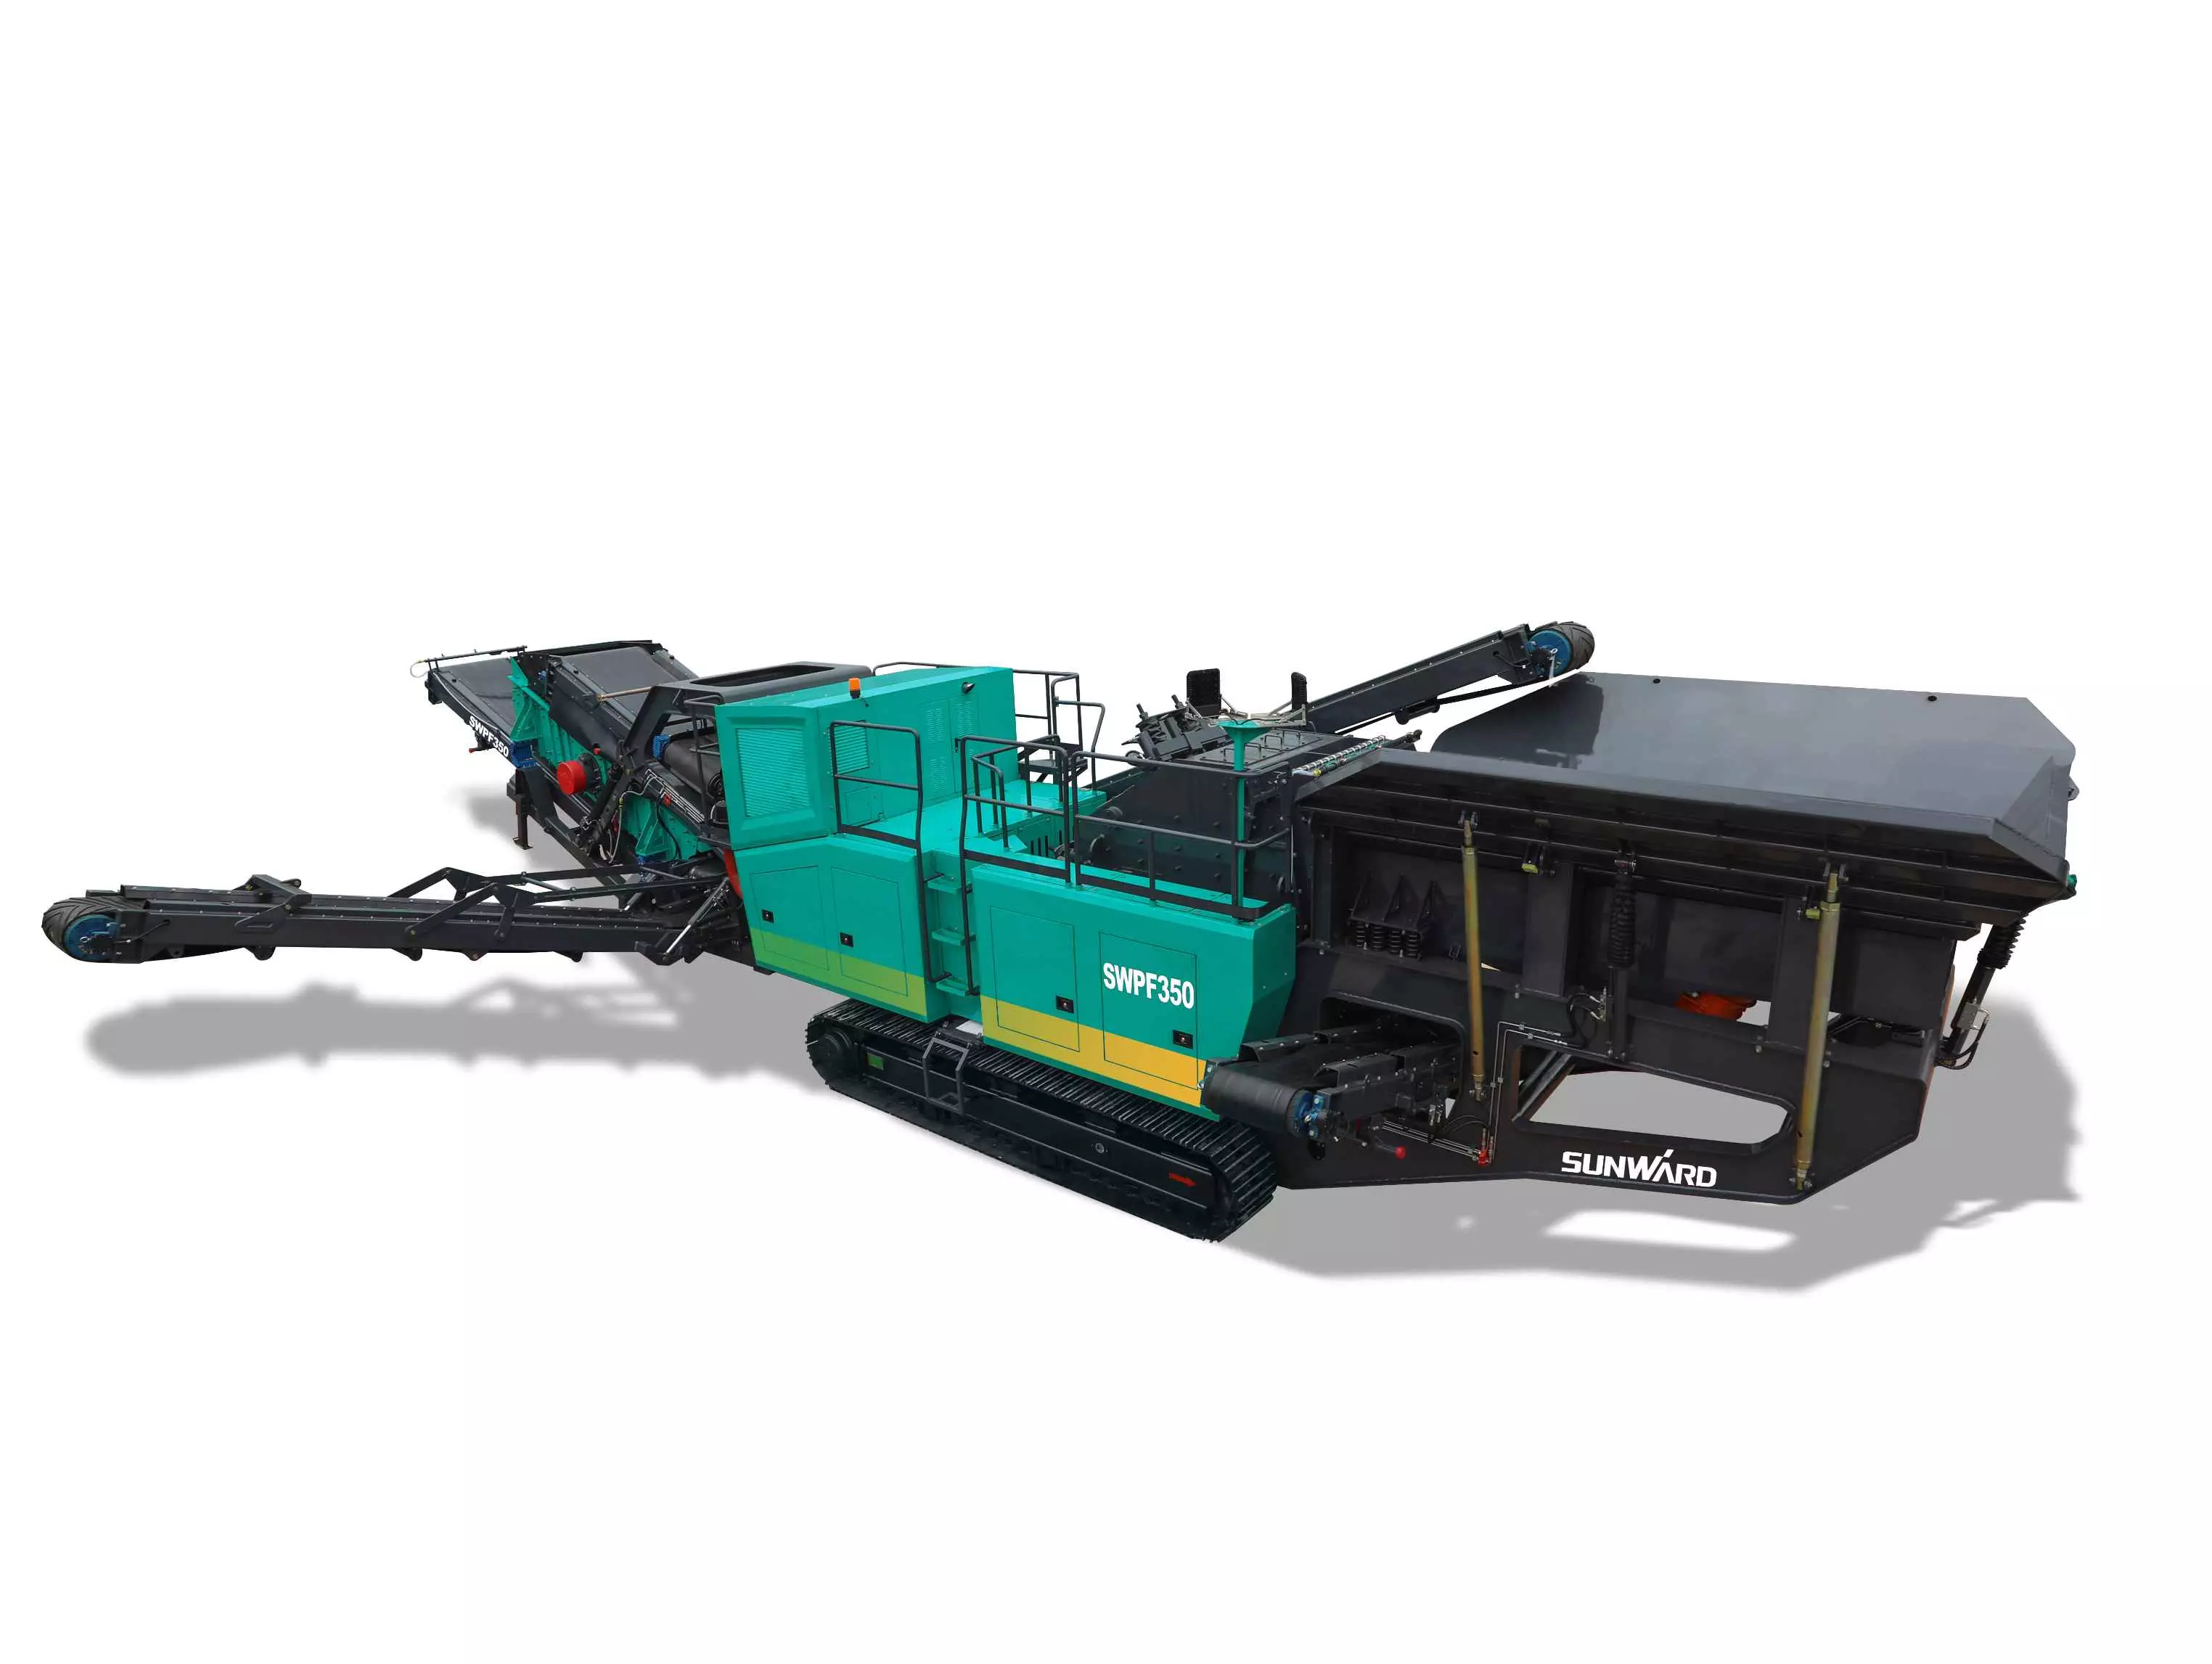 What is the application of the crawler impact crushing station?